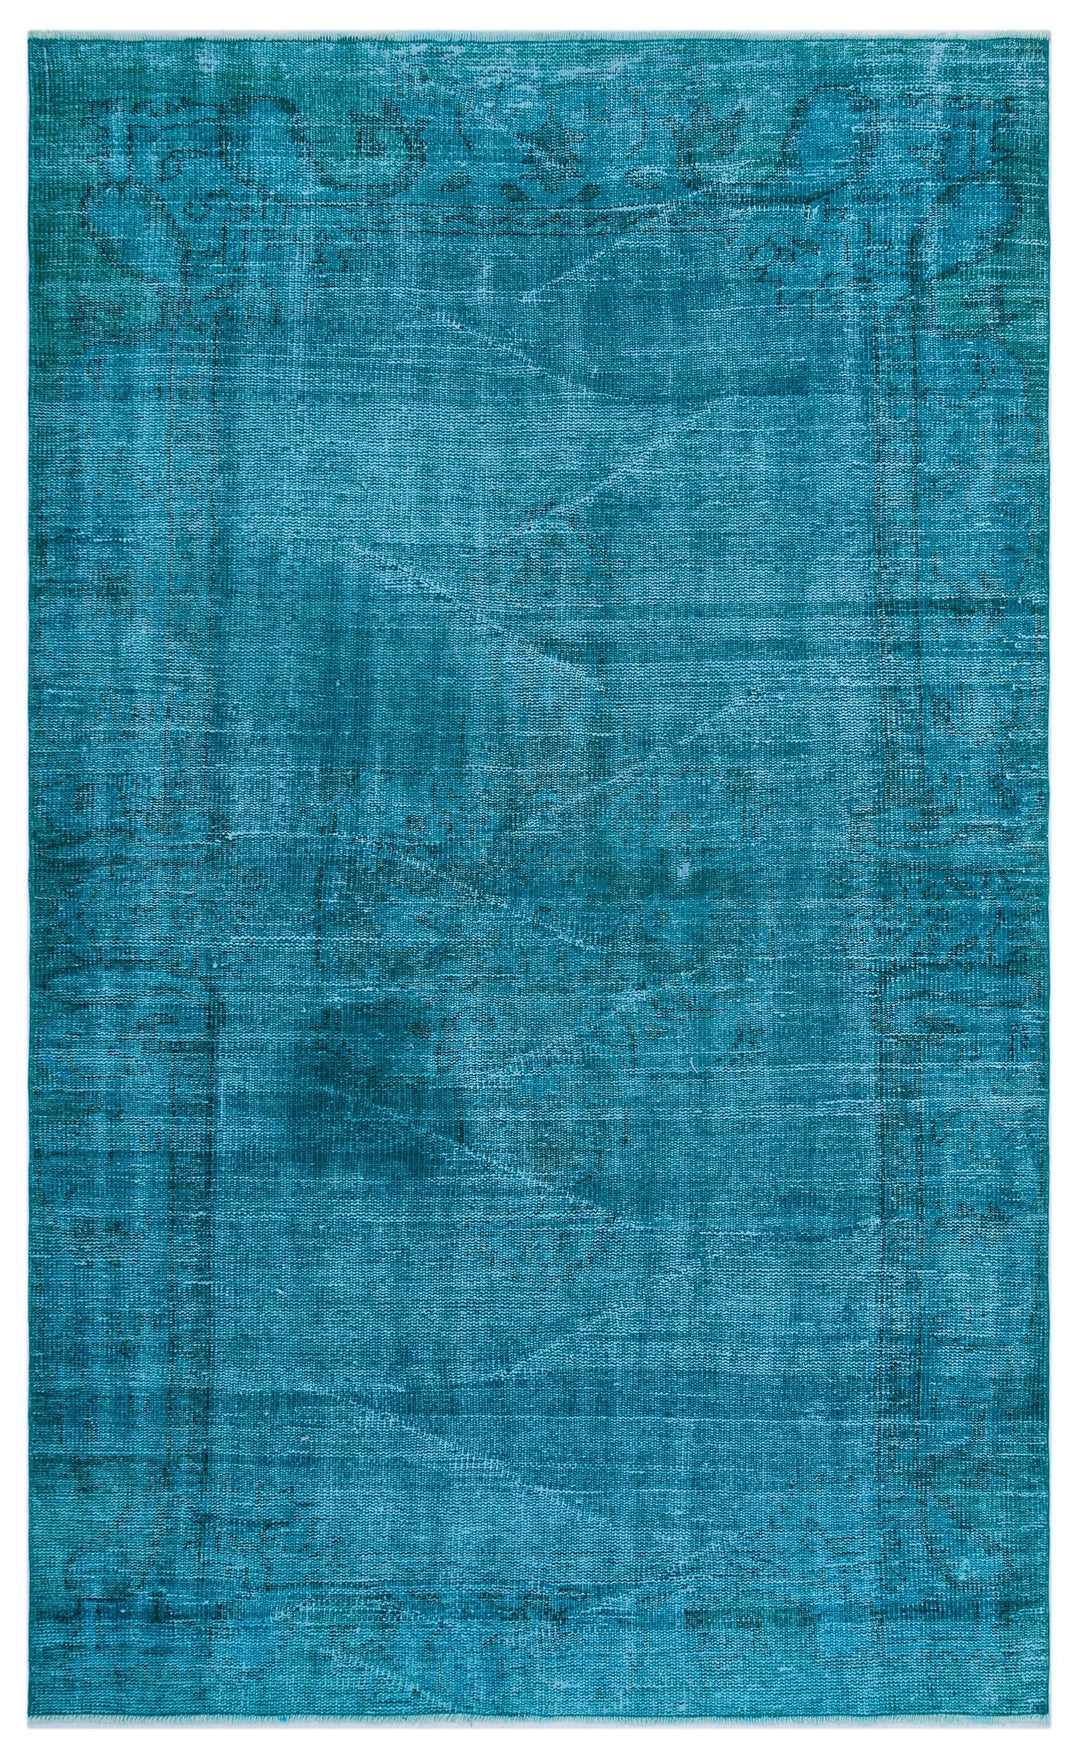 Athens Turquoise Tumbled Wool Hand Woven Carpet 154 x 253